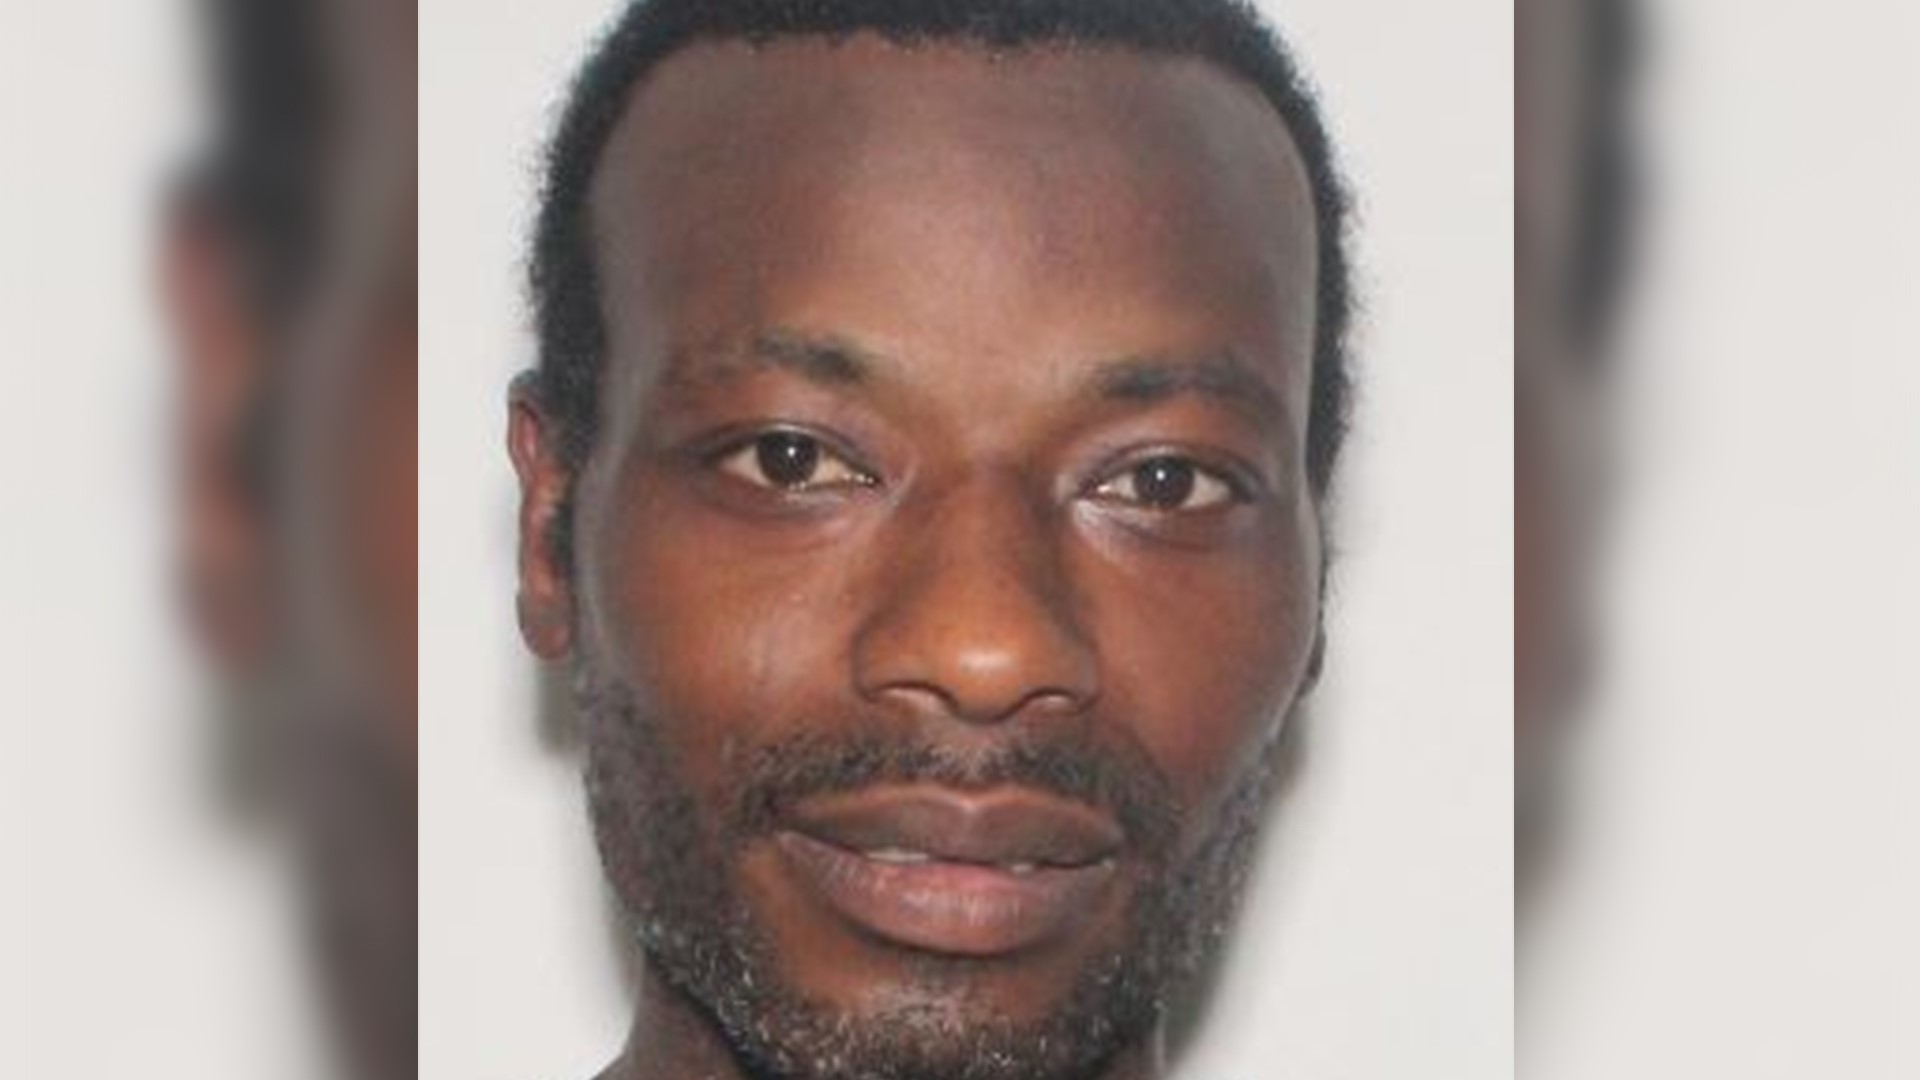 Police believe the shooting was an isolated incident and are looking for Jeremy Mims aka Abdullah Al Karim, 38, in connection with the event.